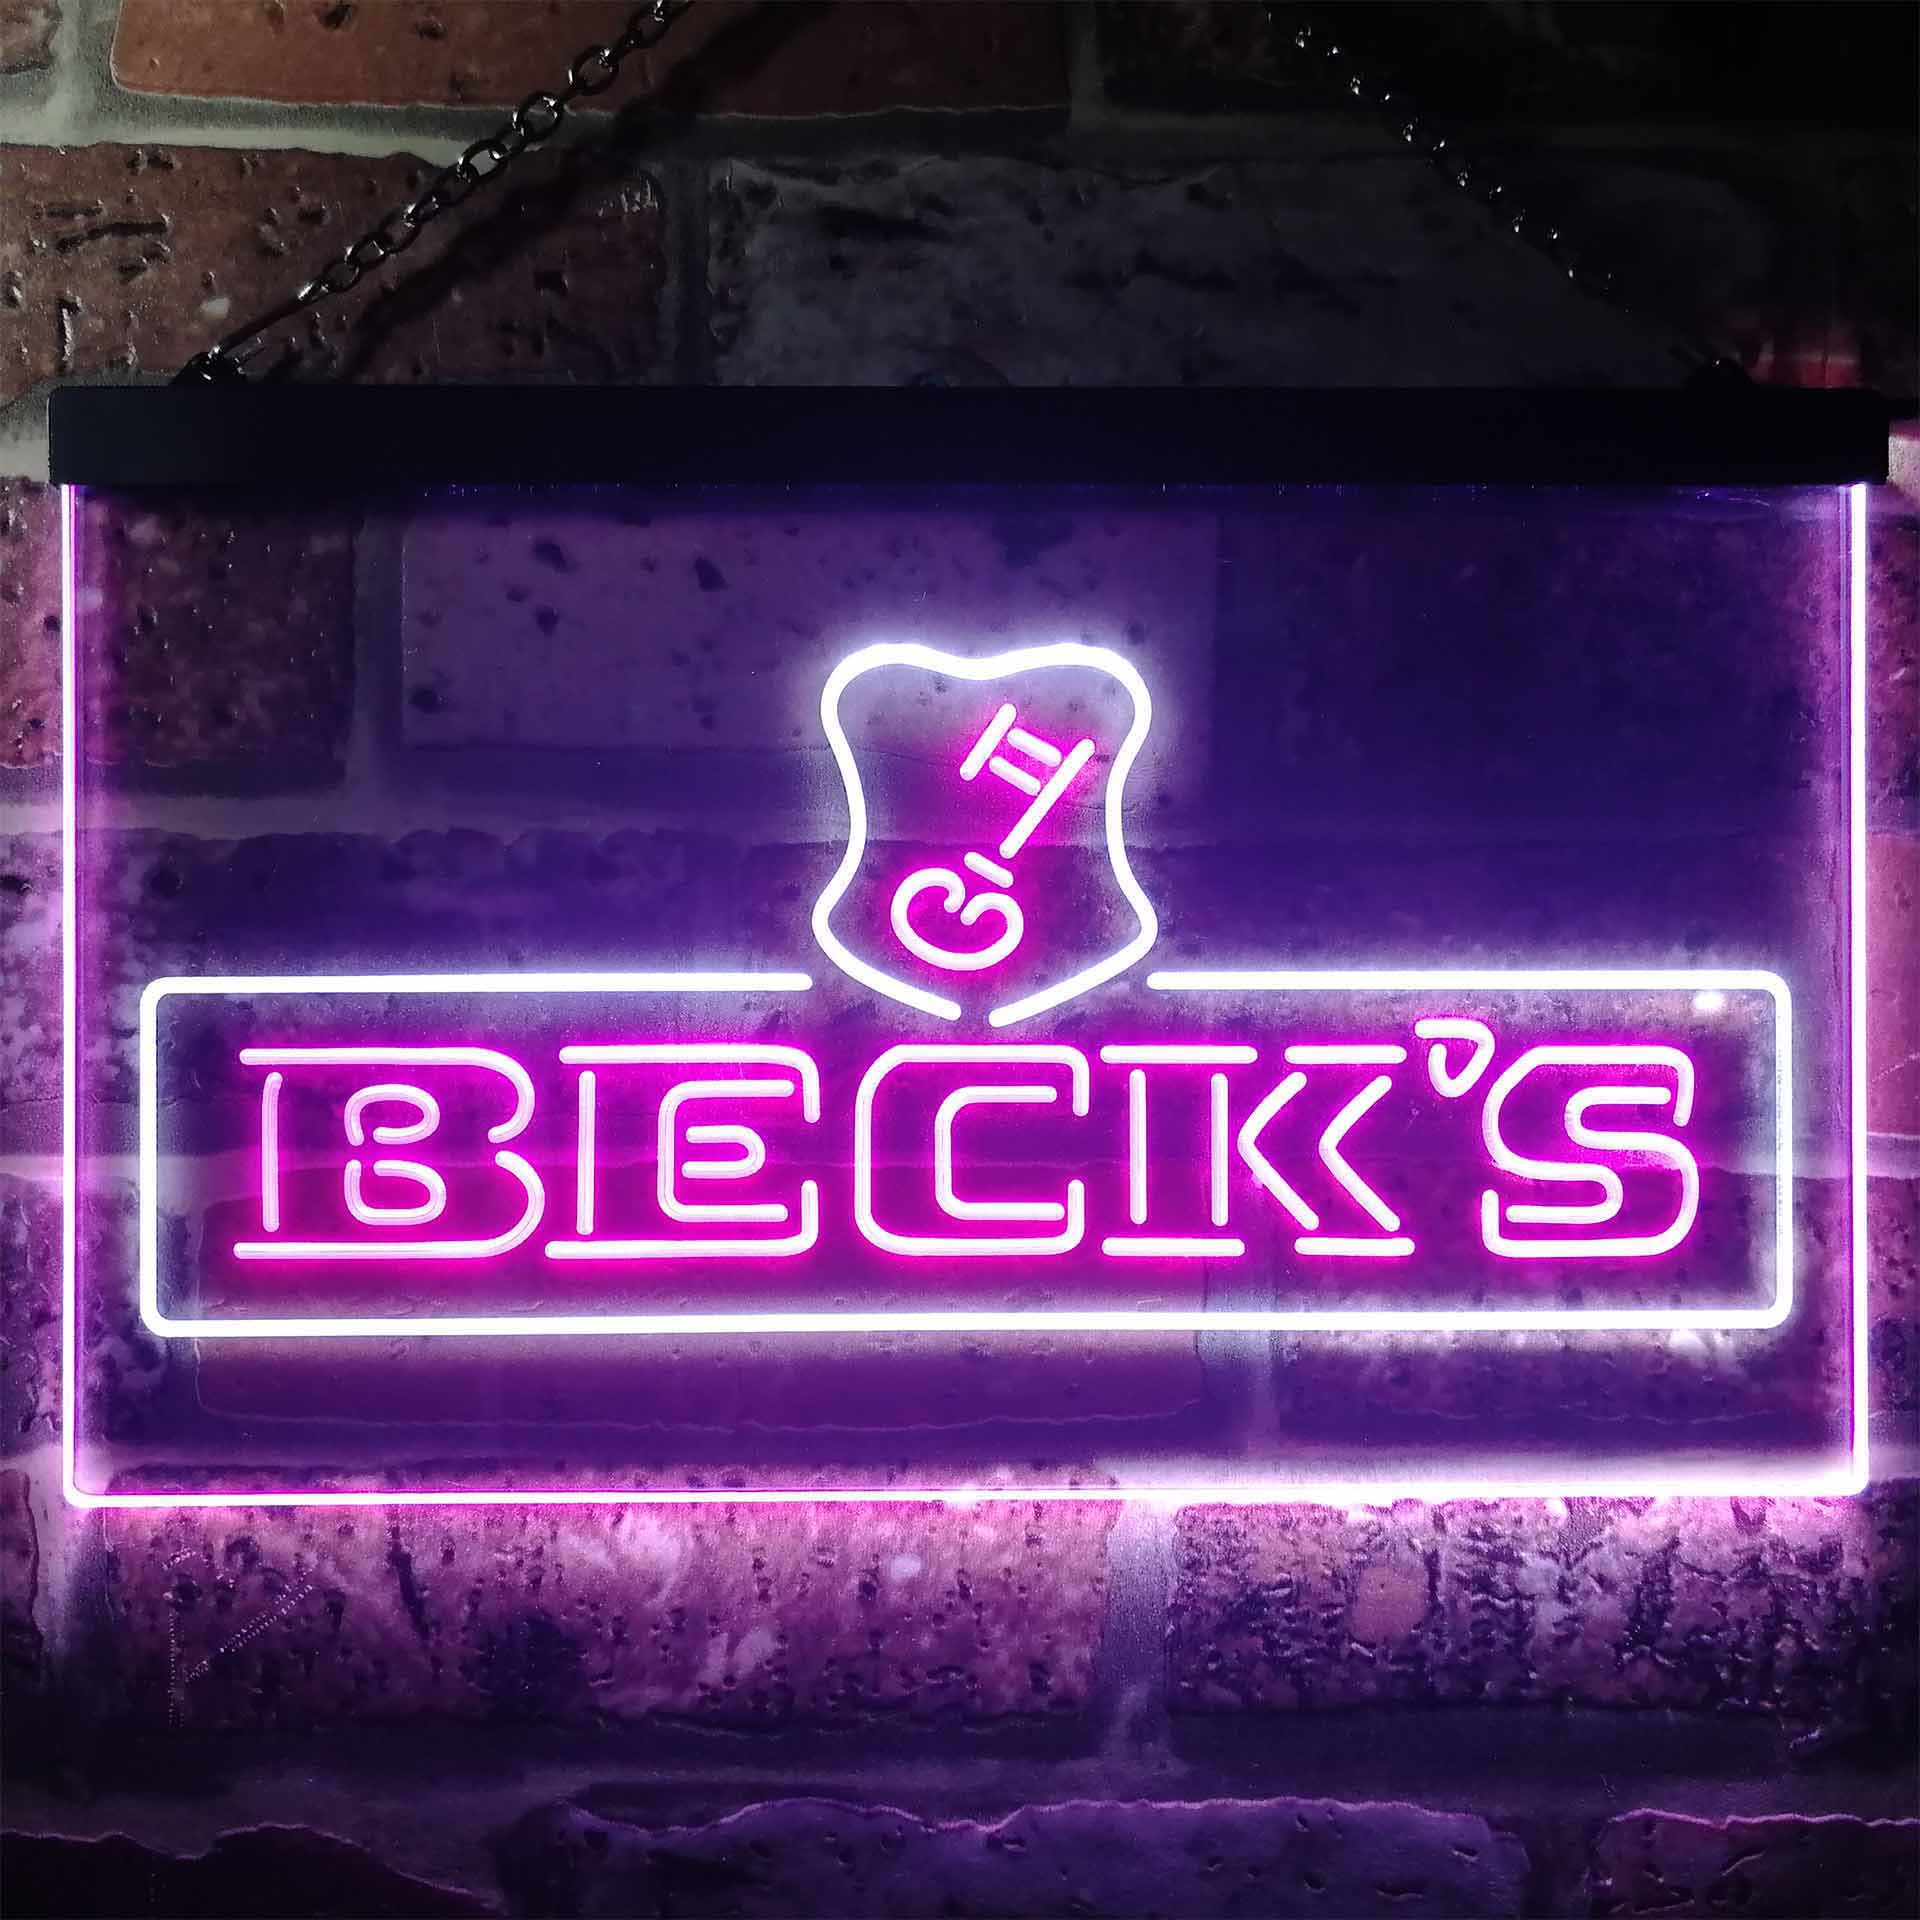 Beck's Beer Dual Color LED Neon Sign ProLedSign